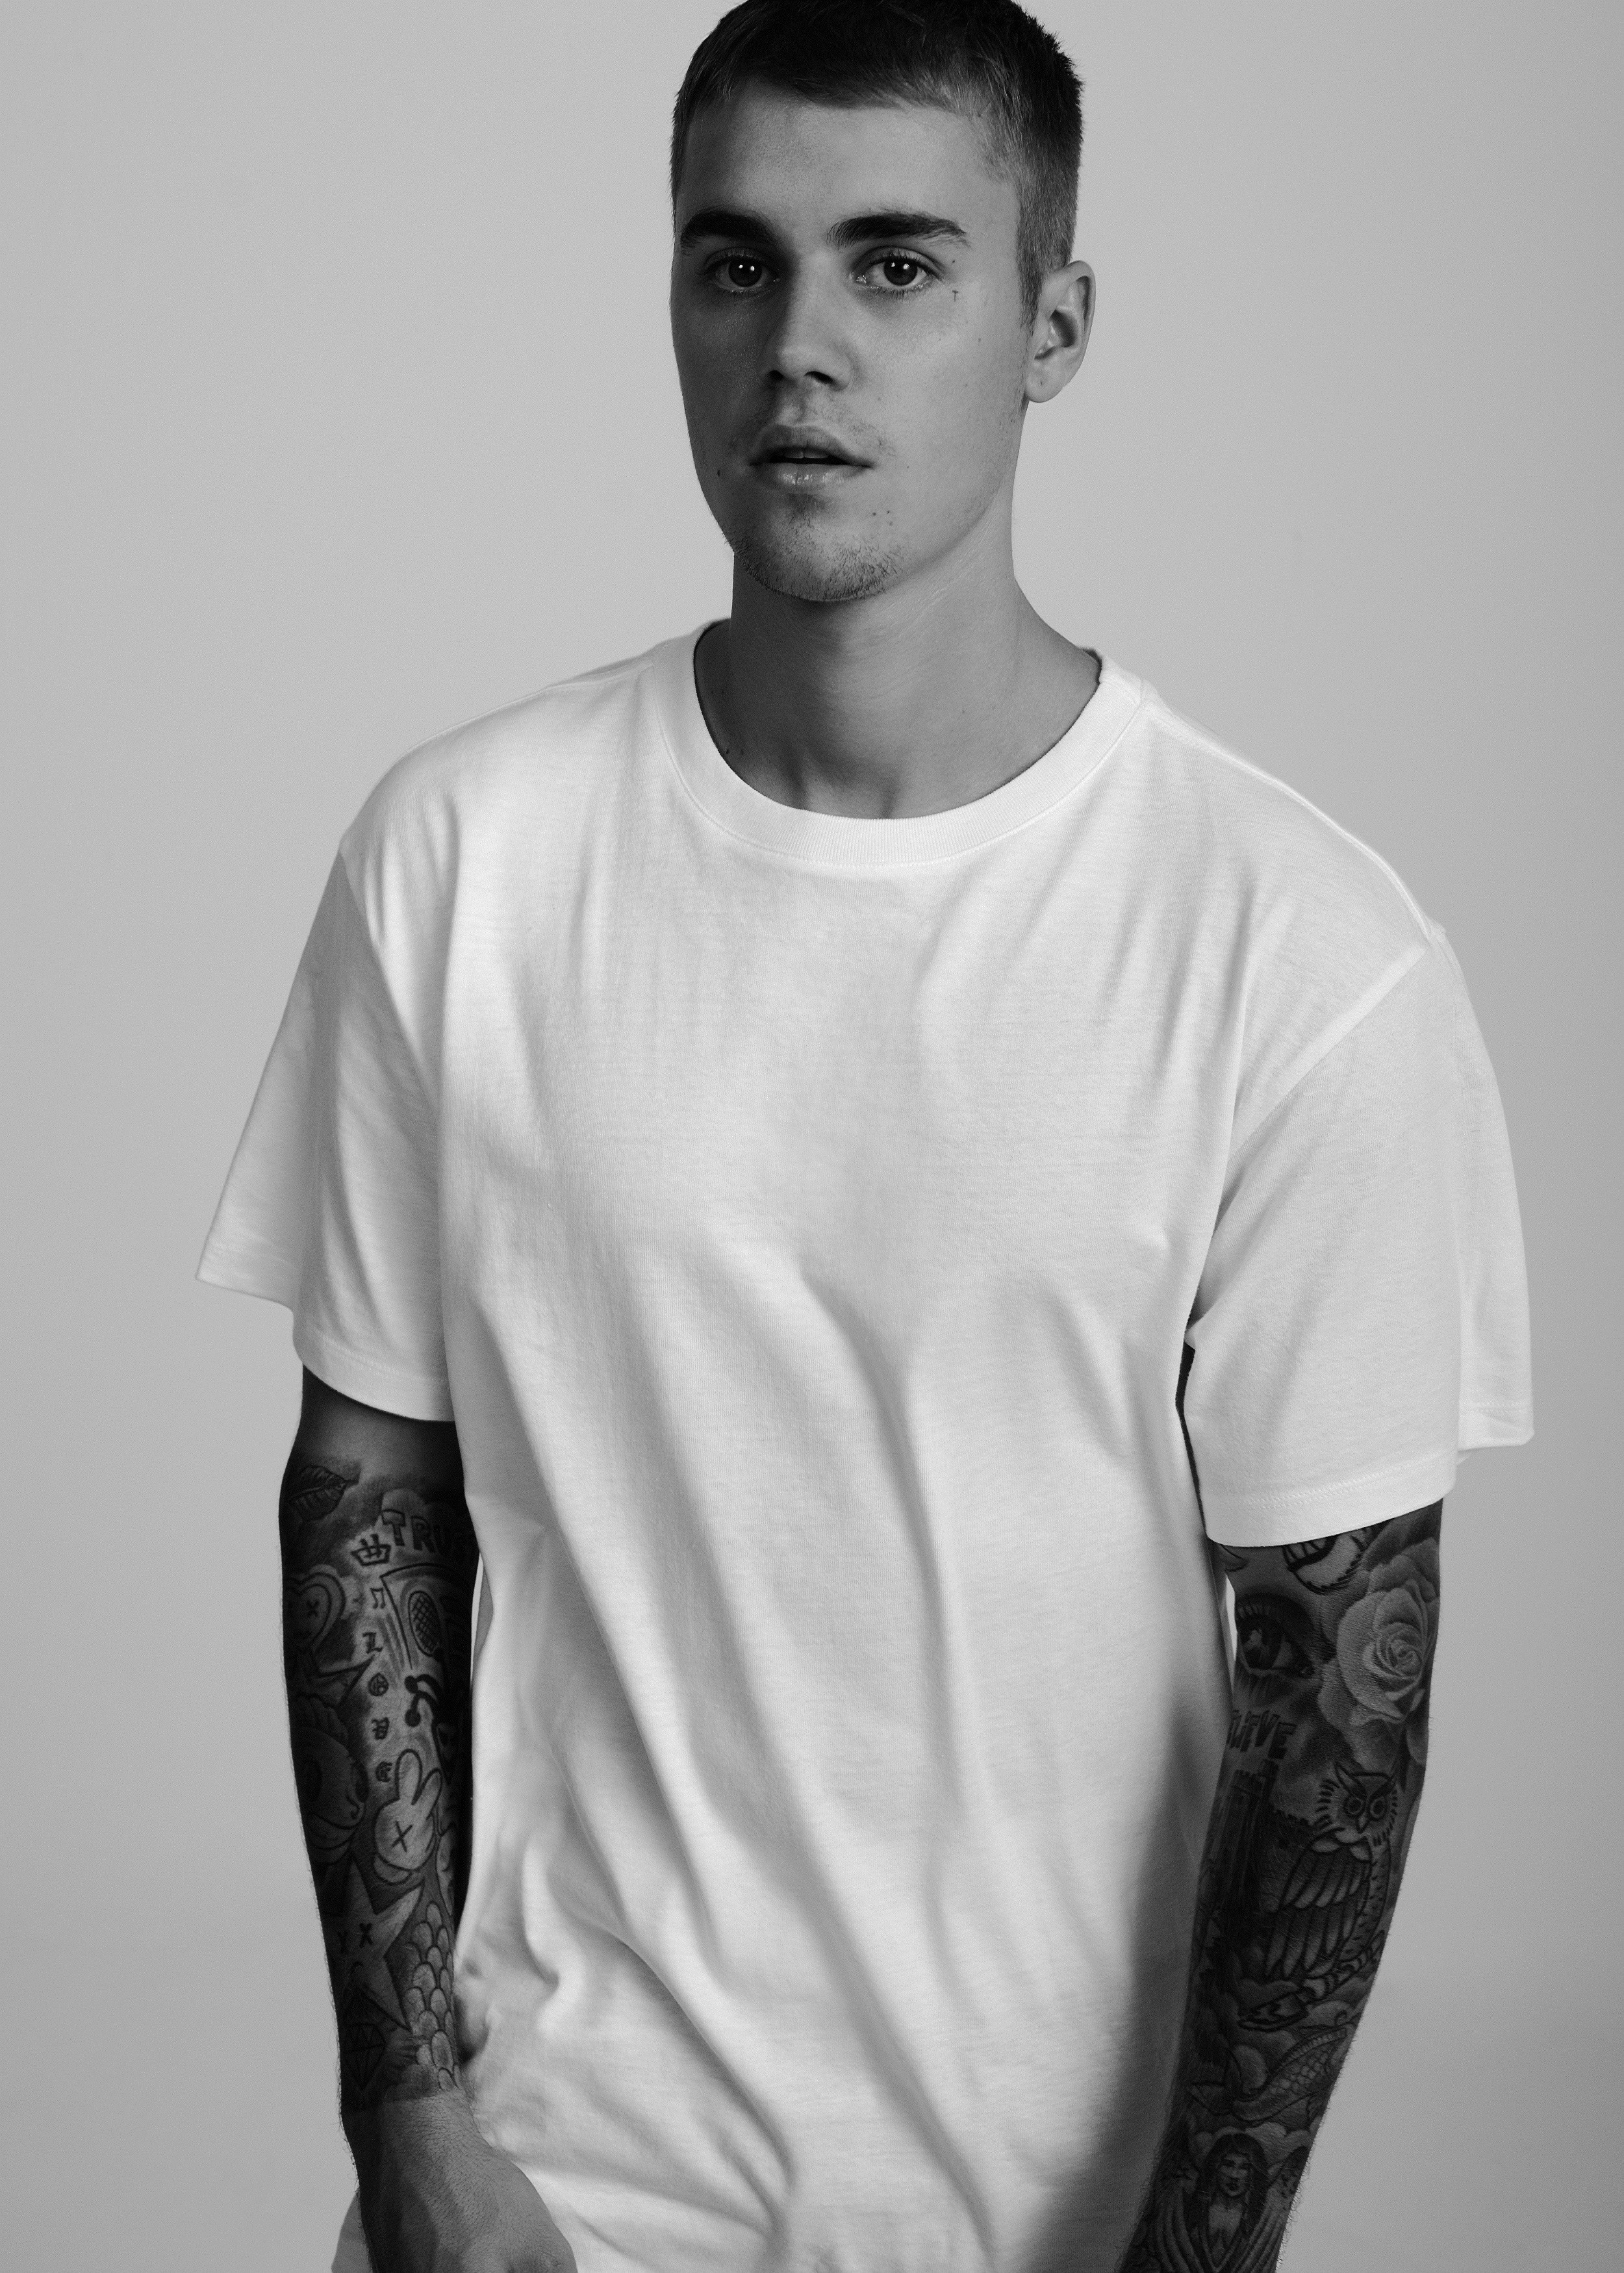 Singer Justin Bieber wears one of the Hanes x Karla T-shirts.